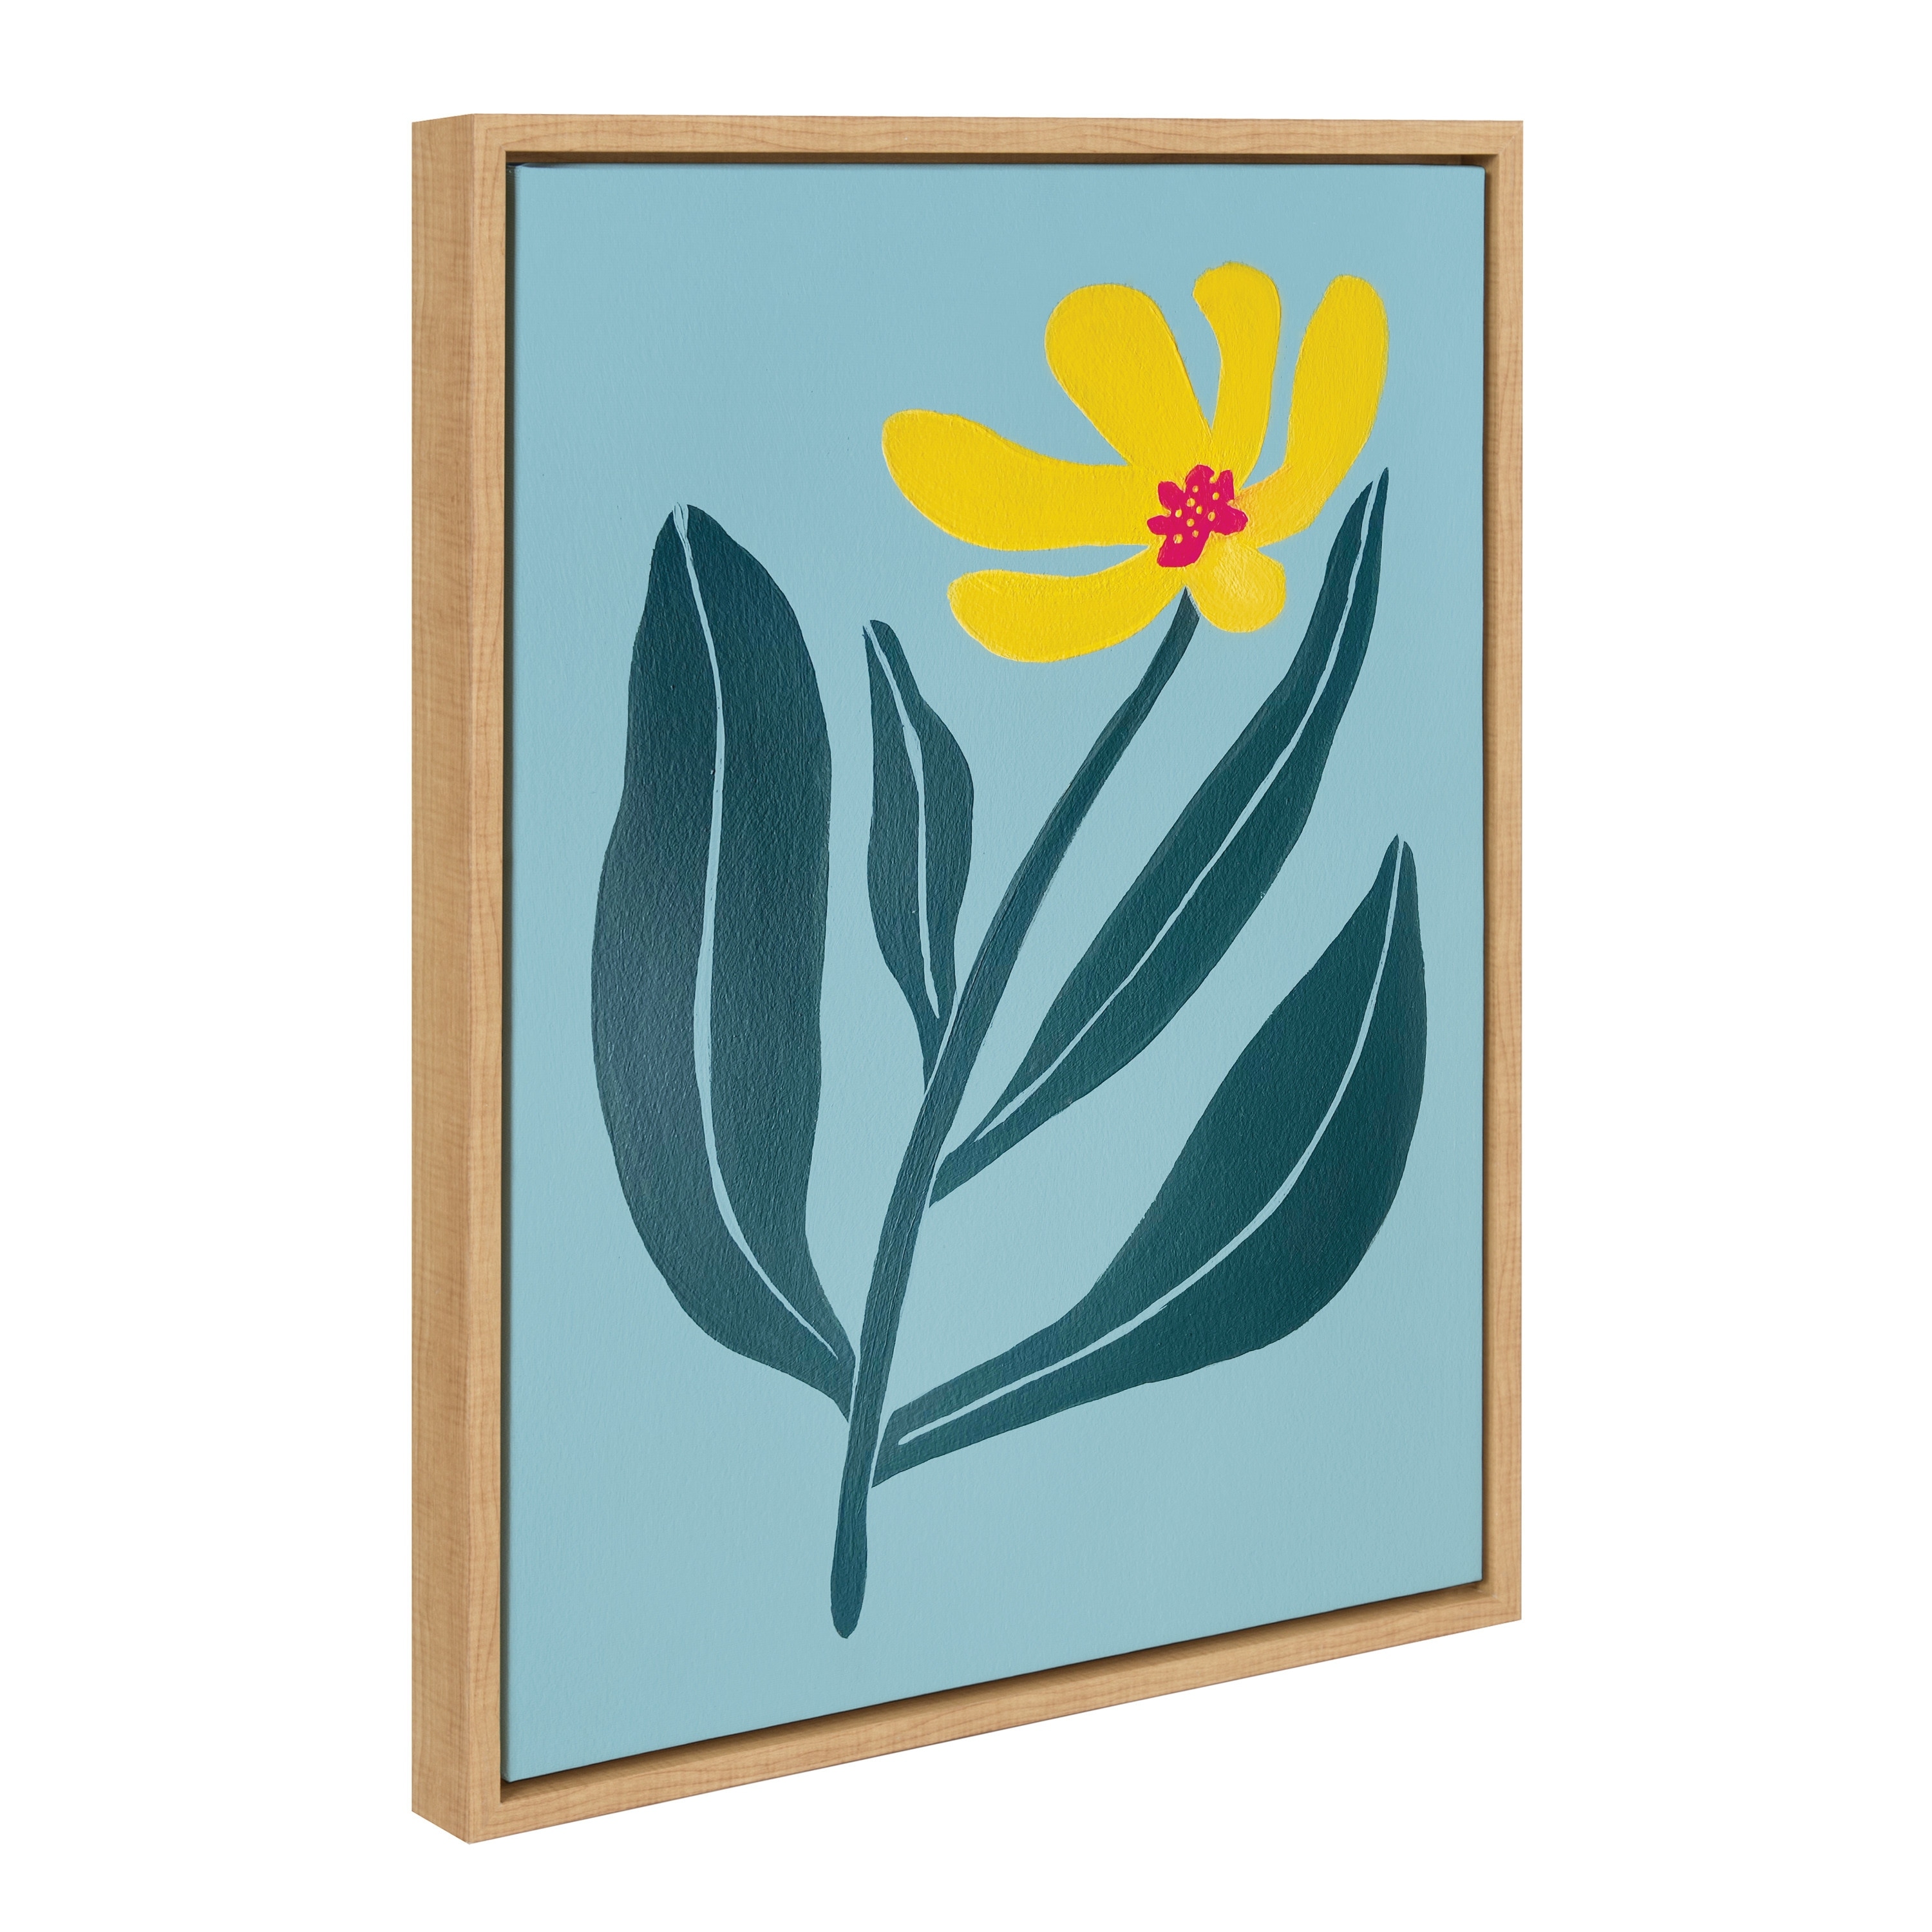 Kate and Laurel Sylvie Yellow Flower Framed Canvas by Emma Daisy  Overstock 36644416